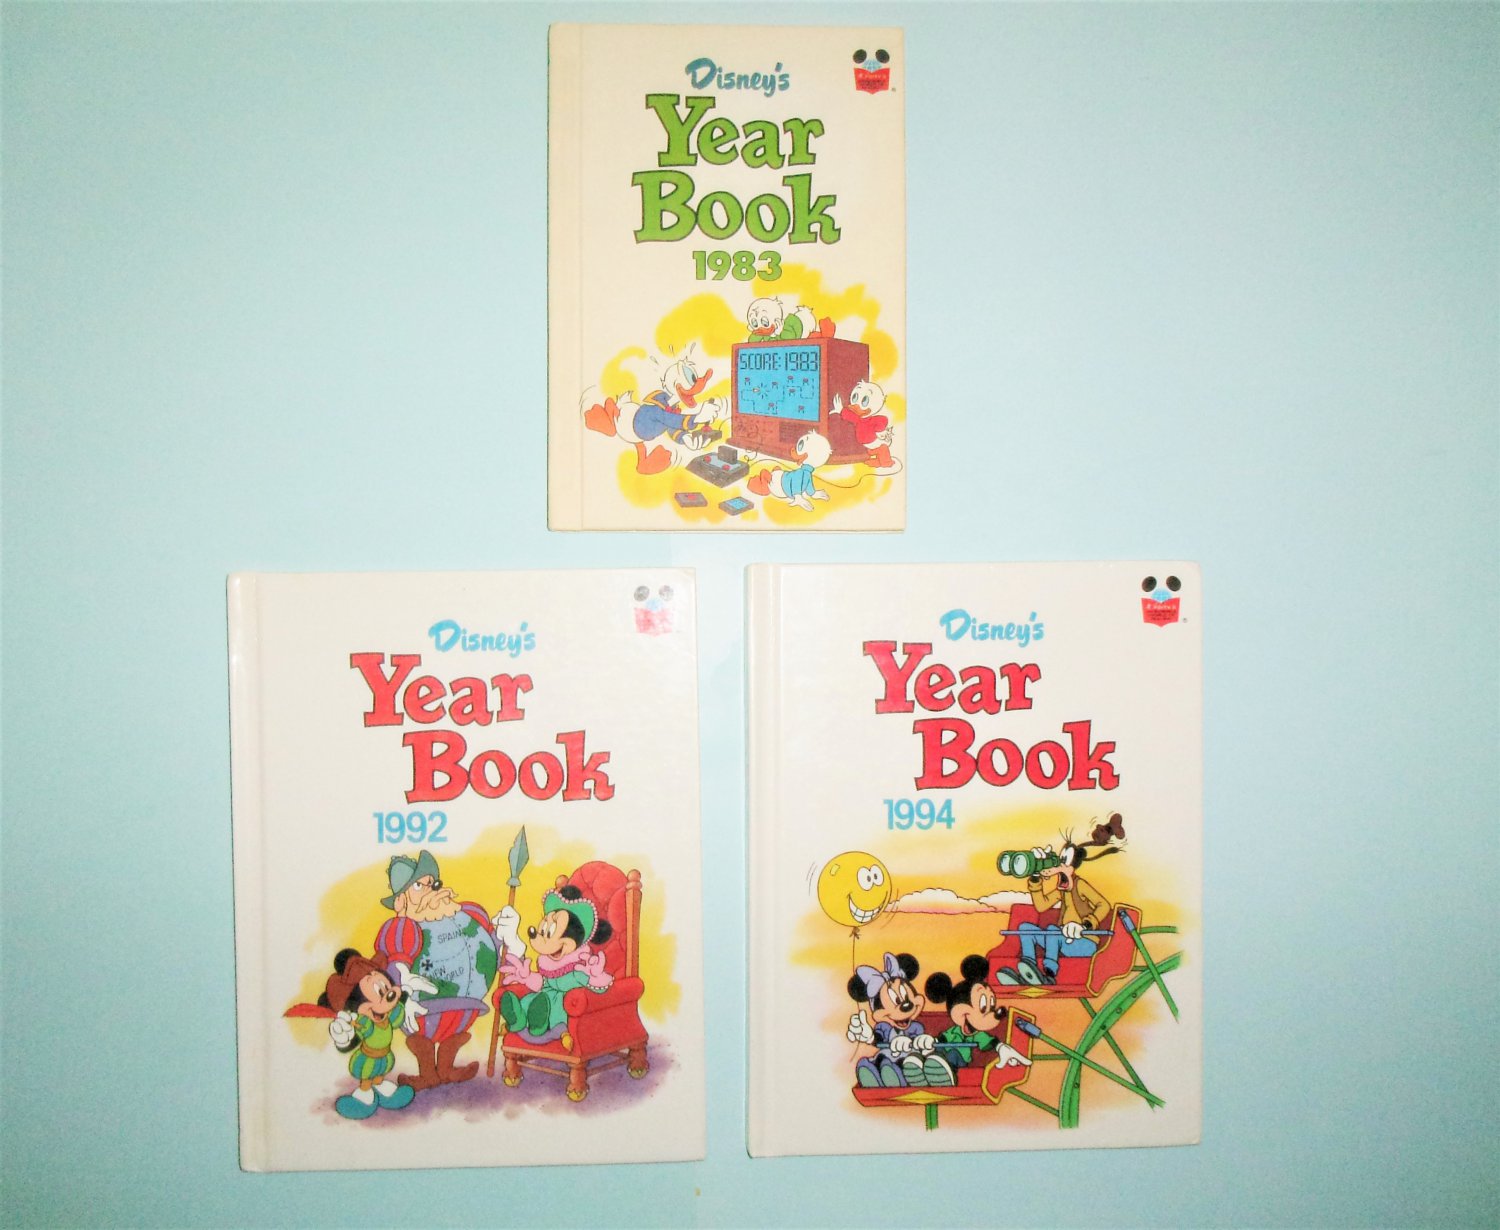 Disney's Wonderful World of Reading Year Books 1983, 1992 and 1994 by Grolier